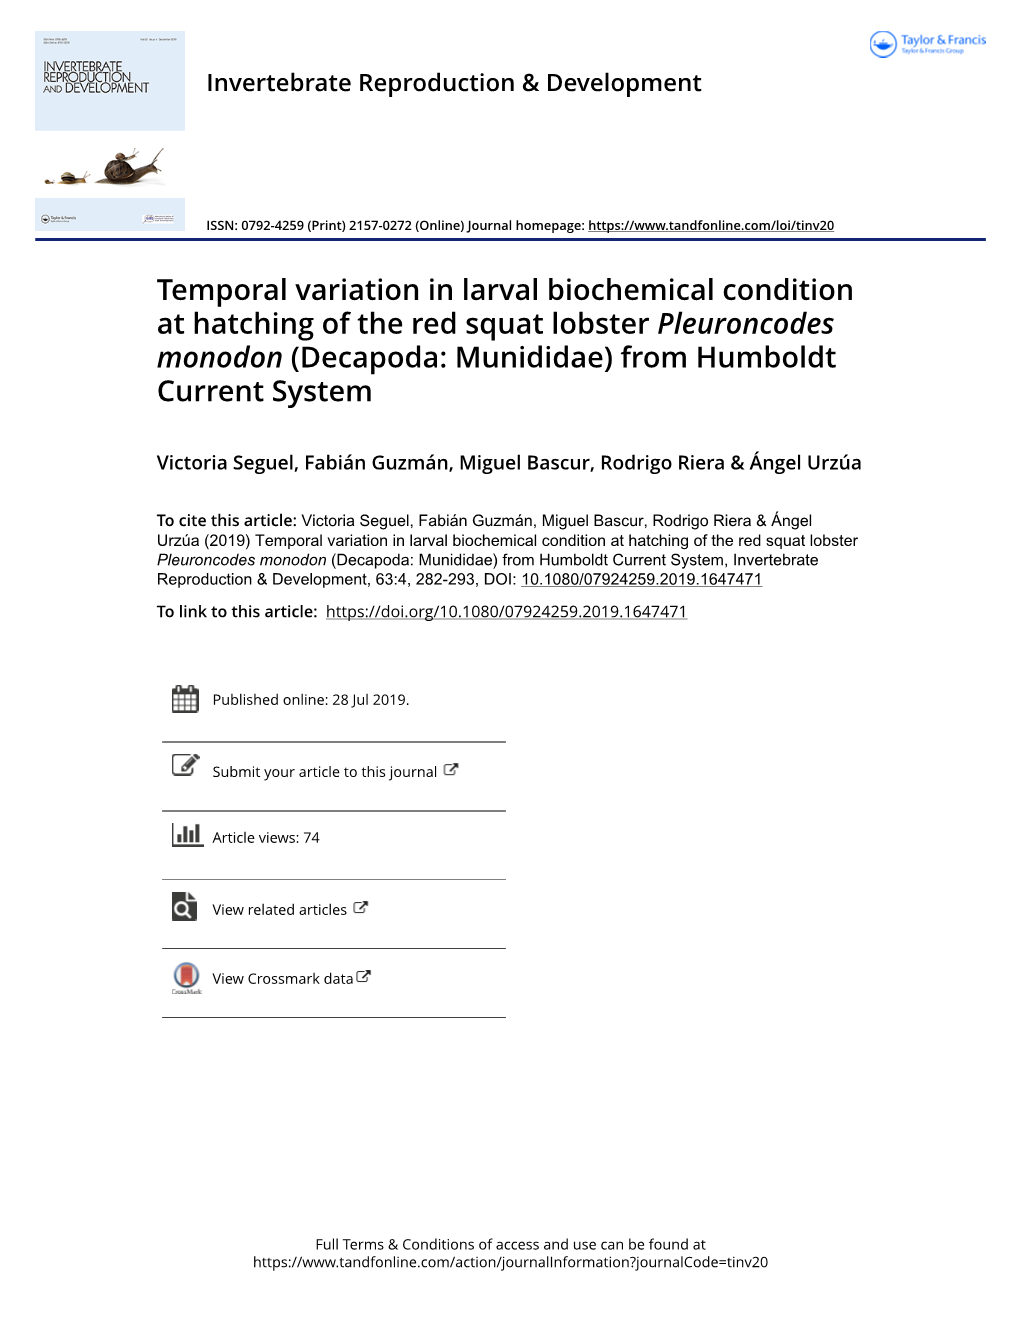 Temporal Variation in Larval Biochemical Condition at Hatching of the Red Squat Lobster Pleuroncodes Monodon (Decapoda: Munididae) from Humboldt Current System